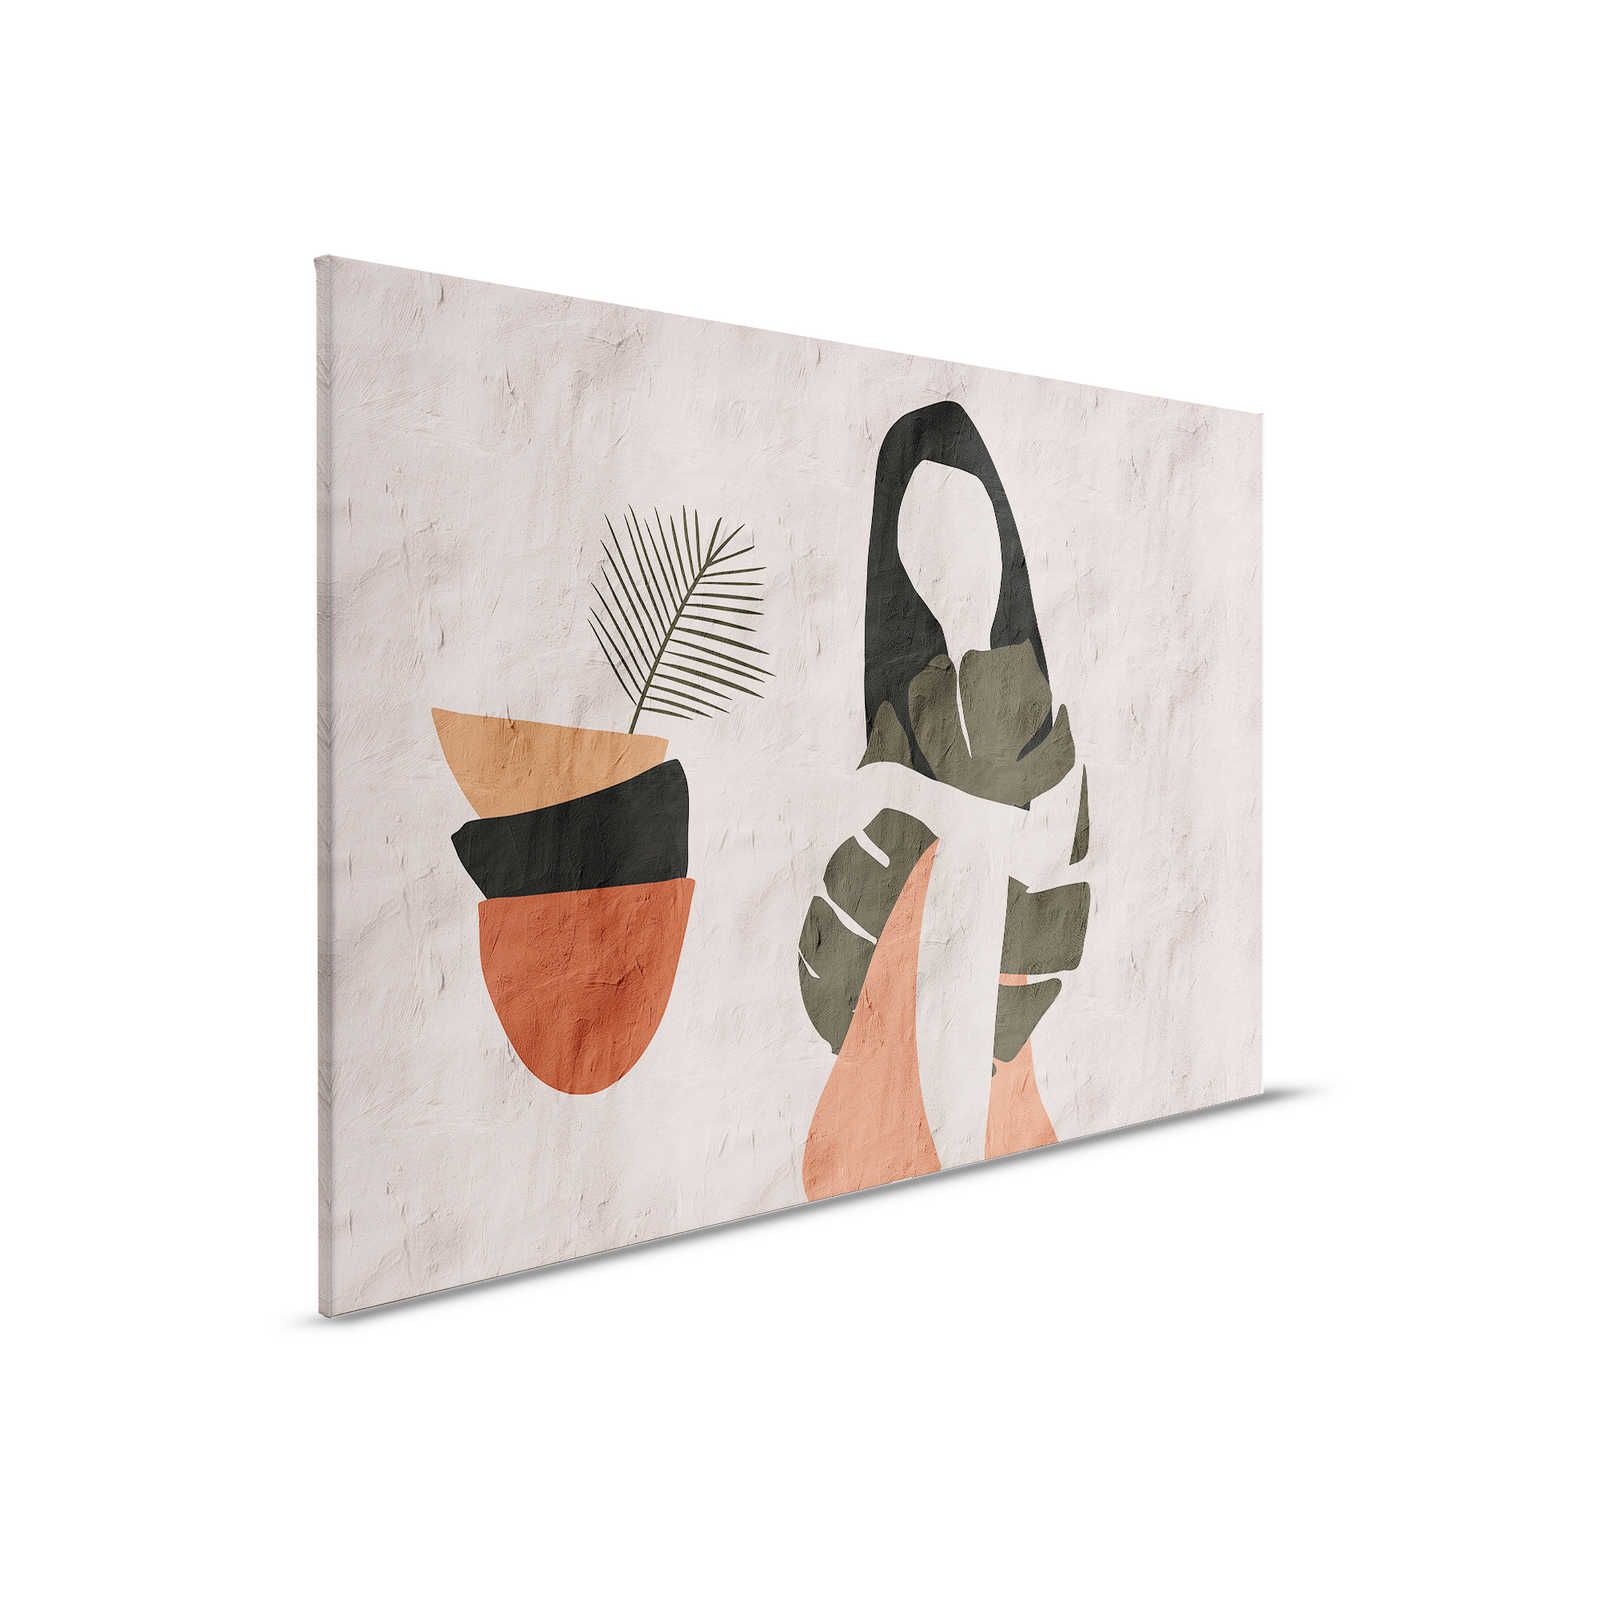         Santa Fe 1 - Canvas painting Clay Wall Beige with Ethno Design - 0,90 m x 0,60 m
    